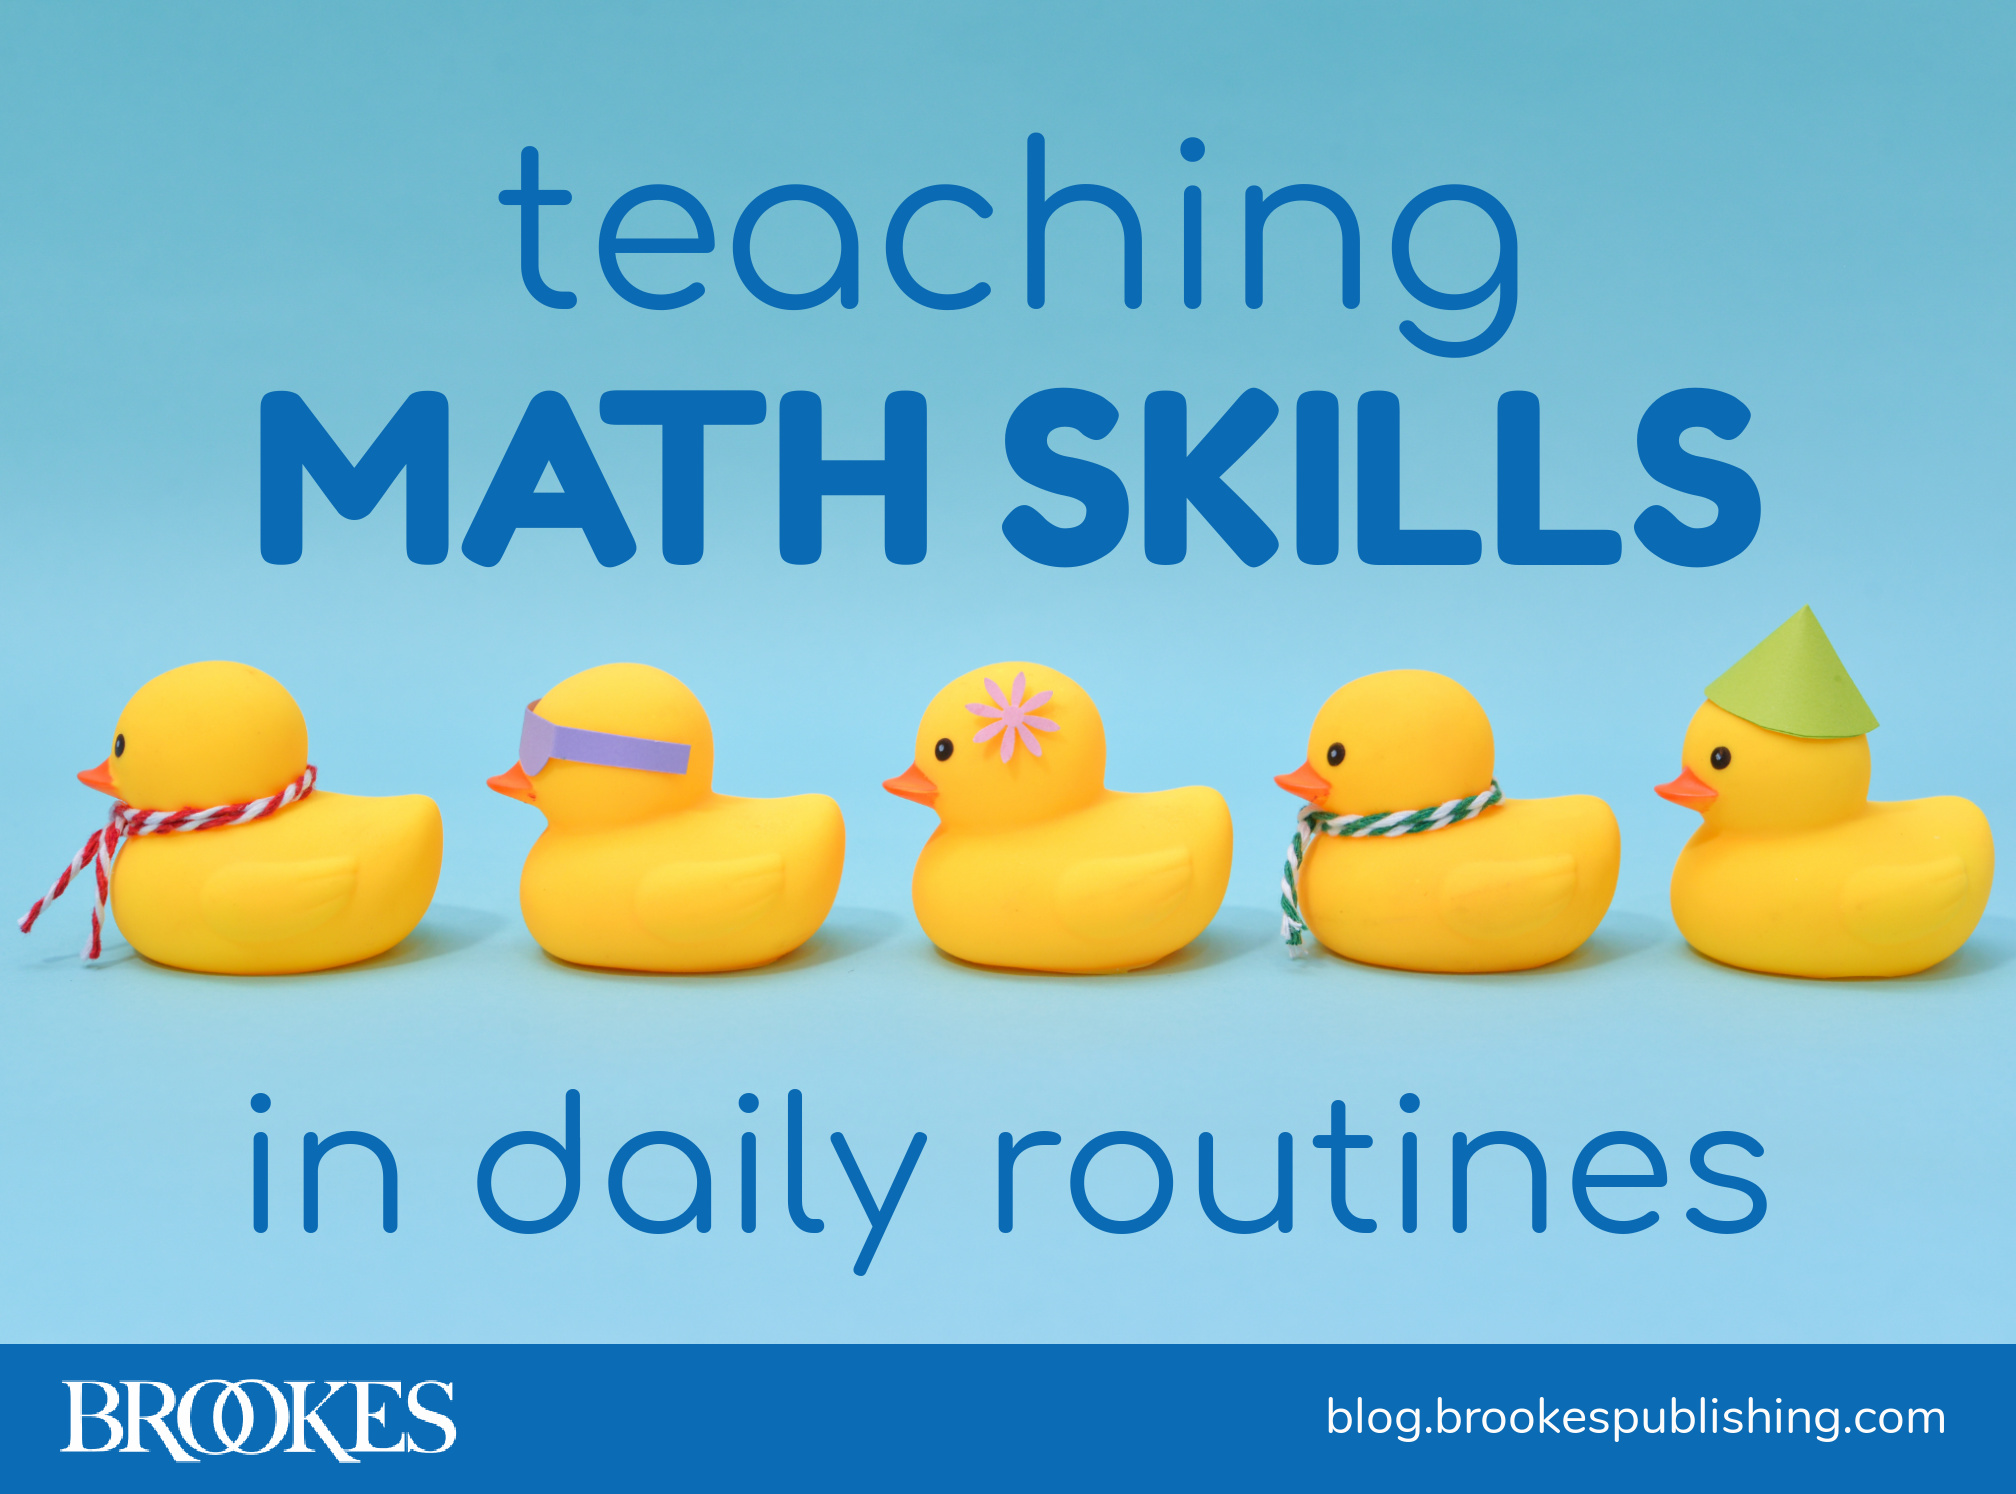 give-your-child-the-gift-of-math-skills-for-their-lifelong-success-munchkin-press